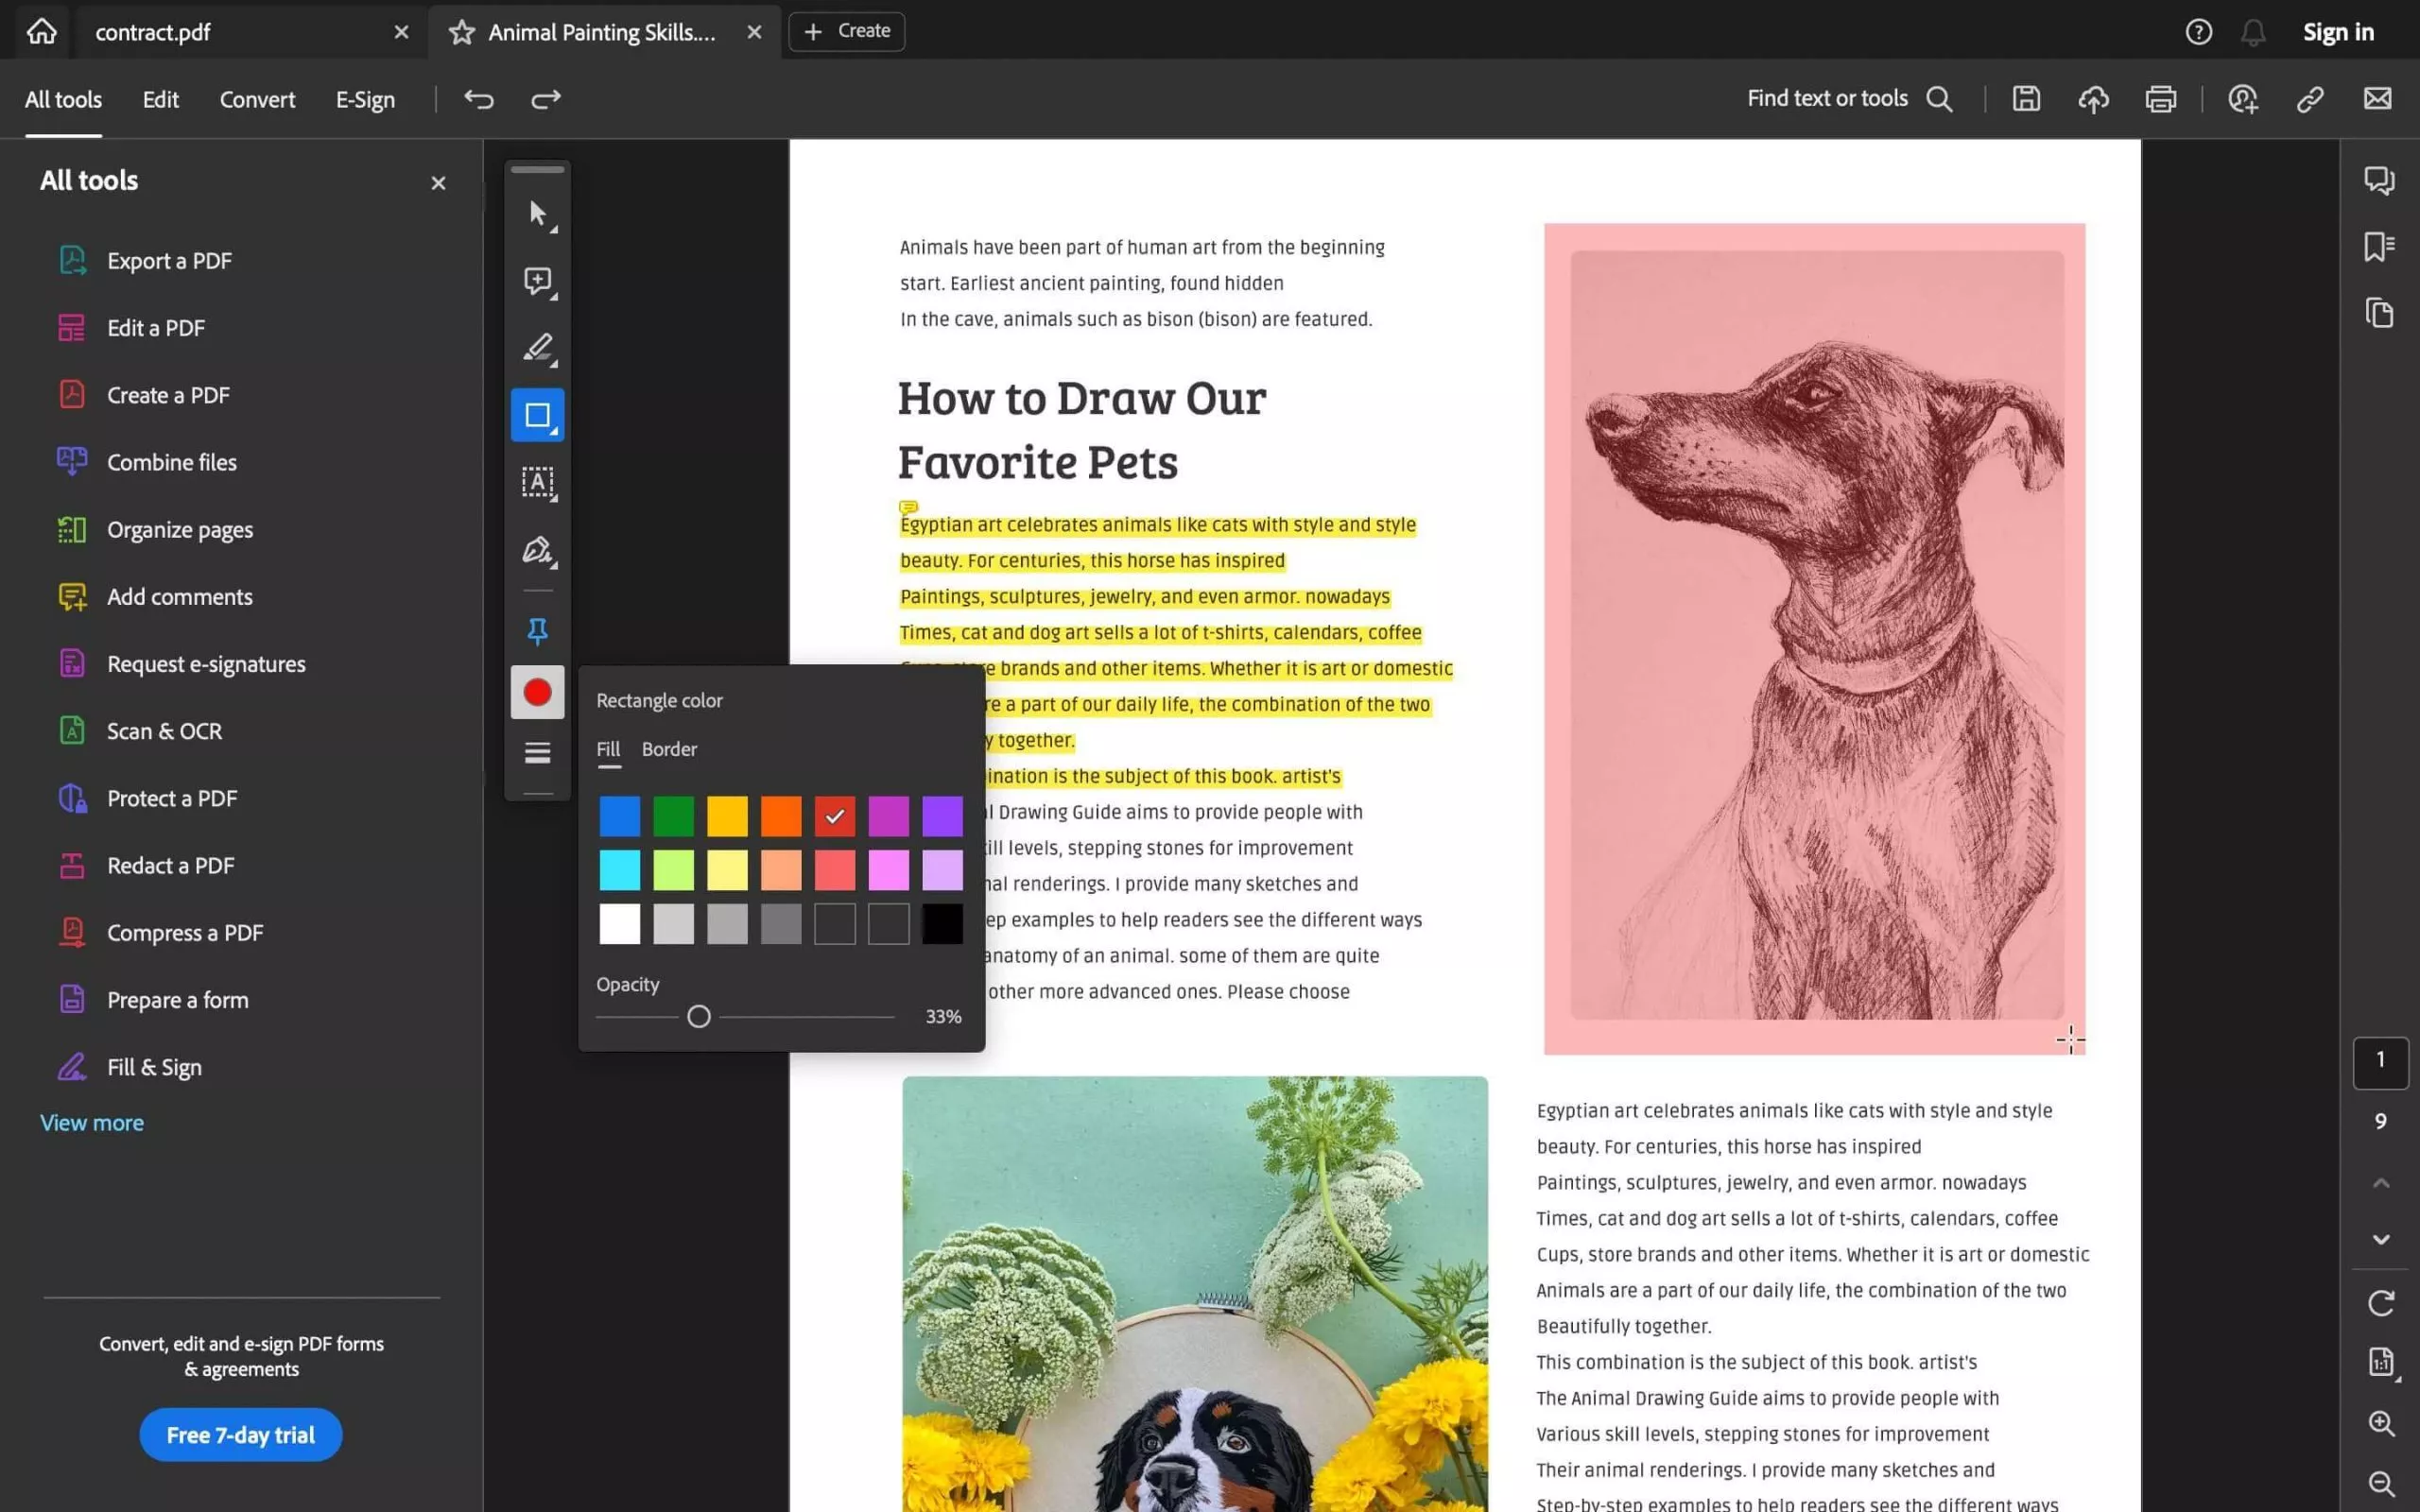 highlight the image with adobe acrobat